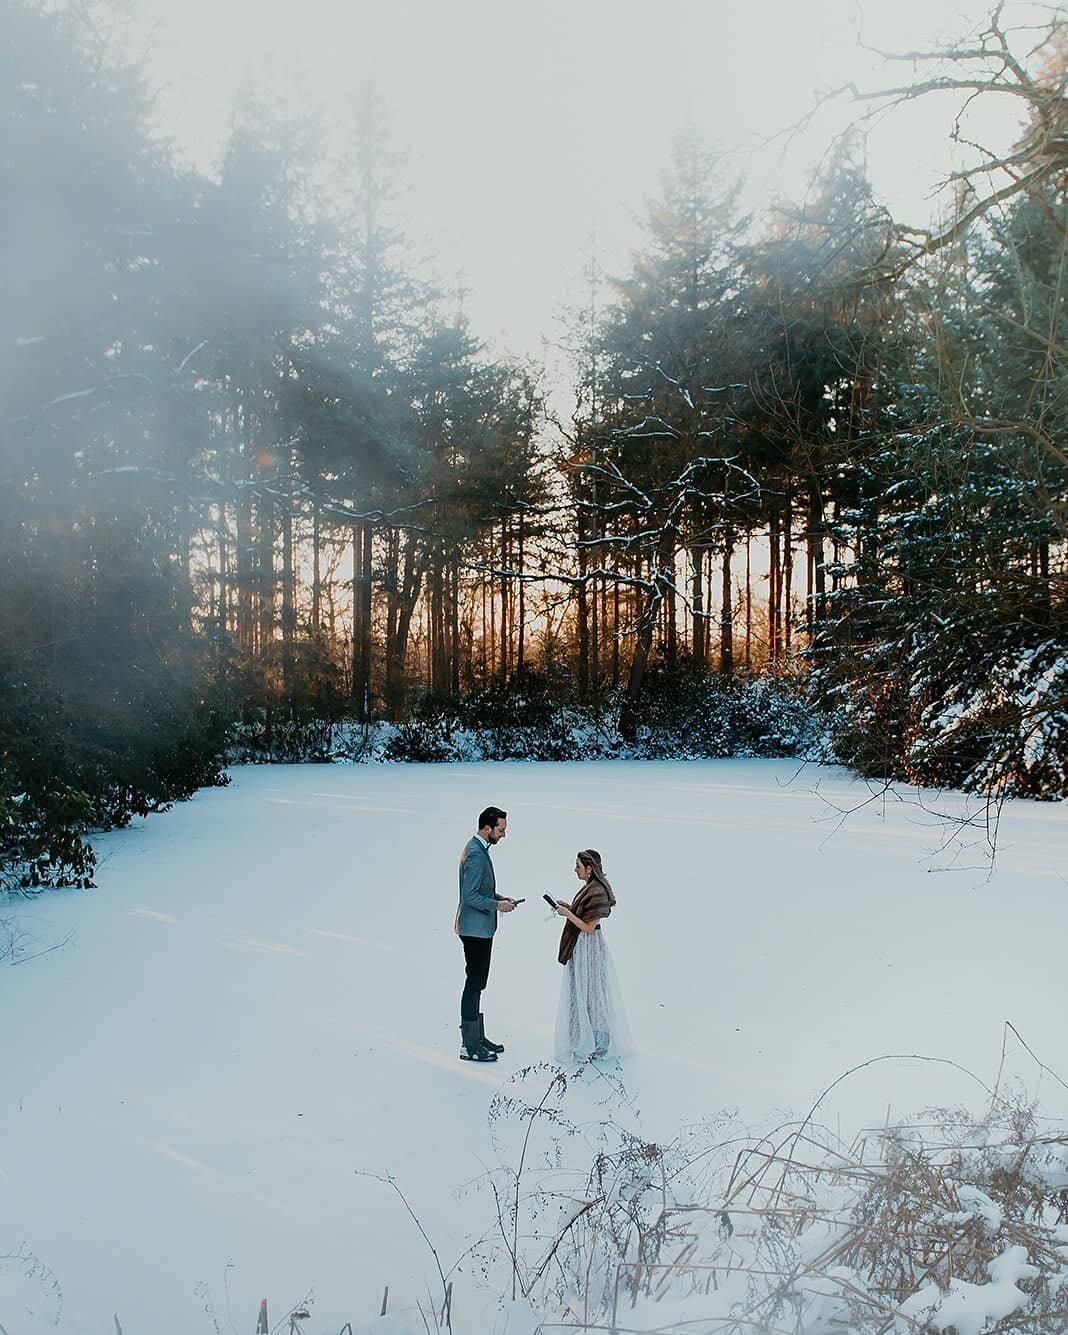 3 Reasons to Elope in the Winter! ❄ Struggling to decide if you want to get married during the winter season?

A winter elopement is for you two if you love:

- That cosy athmosphere that only the wintertime has (snowy landscape, warming up by the fi